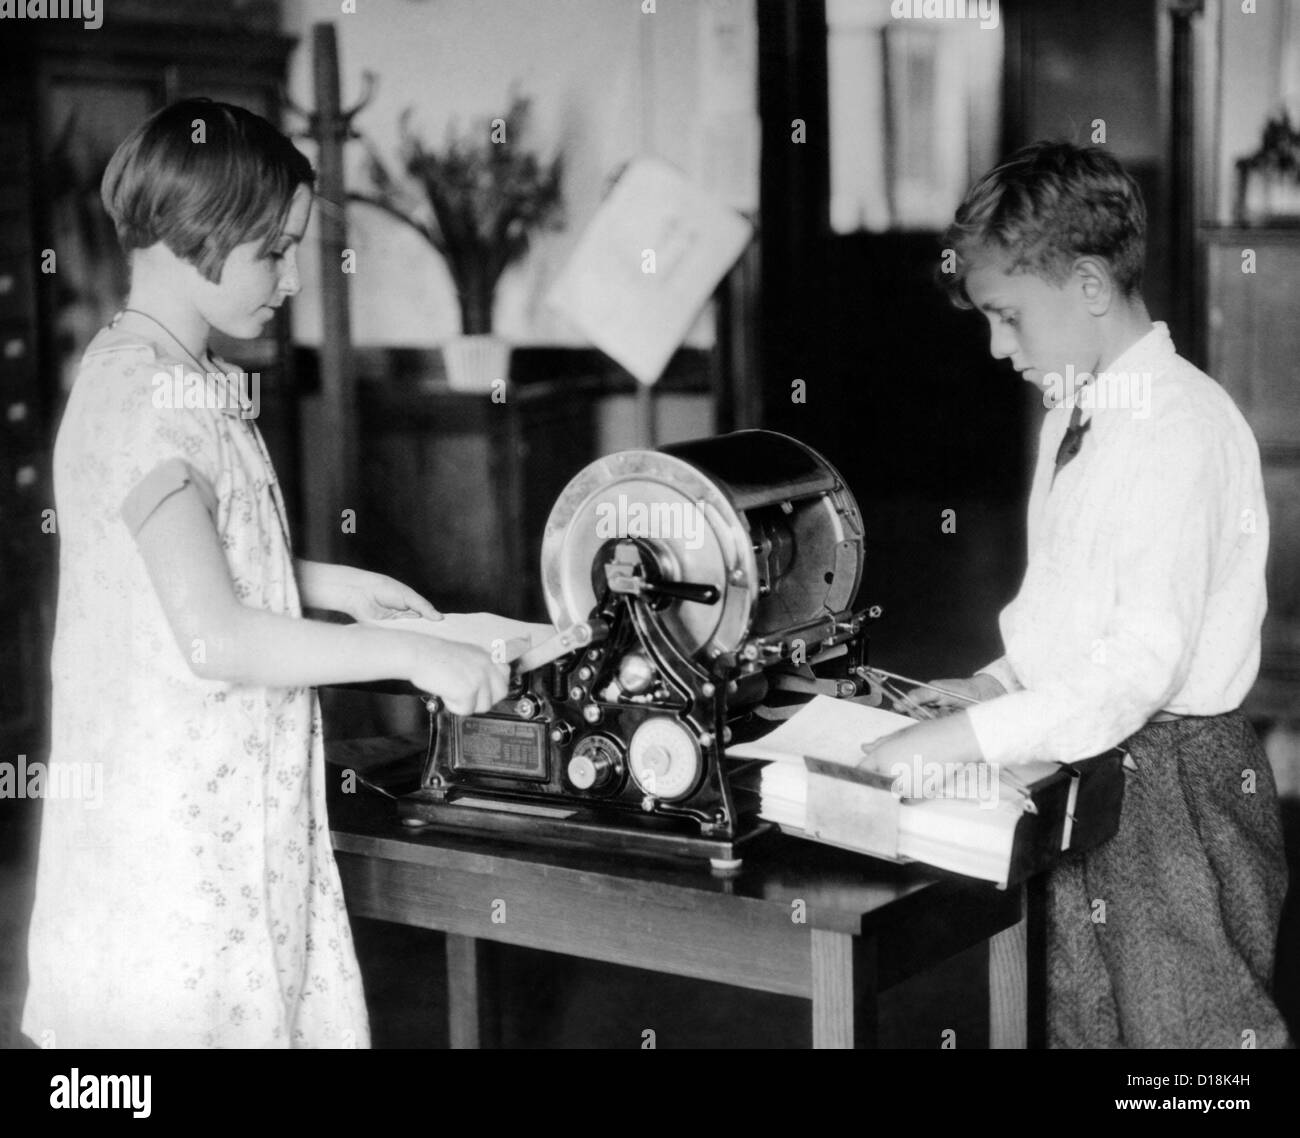 School children work on a mimeograph machine. Thomas Edison had two patents for an 'Autographic Printing' that worked by Stock Photo